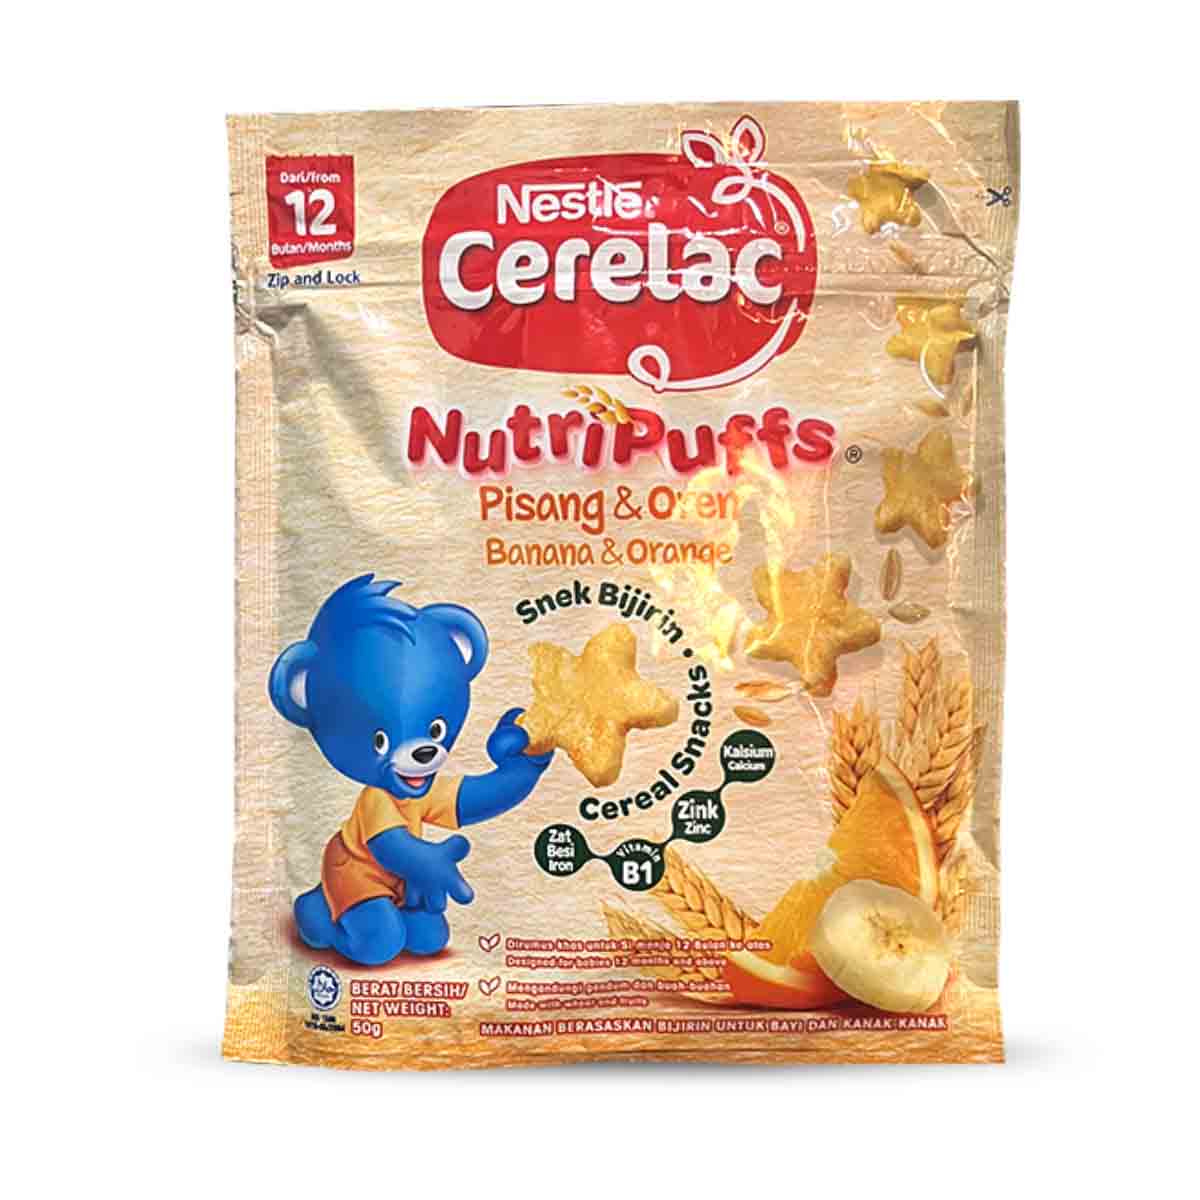 Buy Nestle Cerelac Nutri Puffs Baby Snack with Banana & Orange Online in India at uyyaala.com